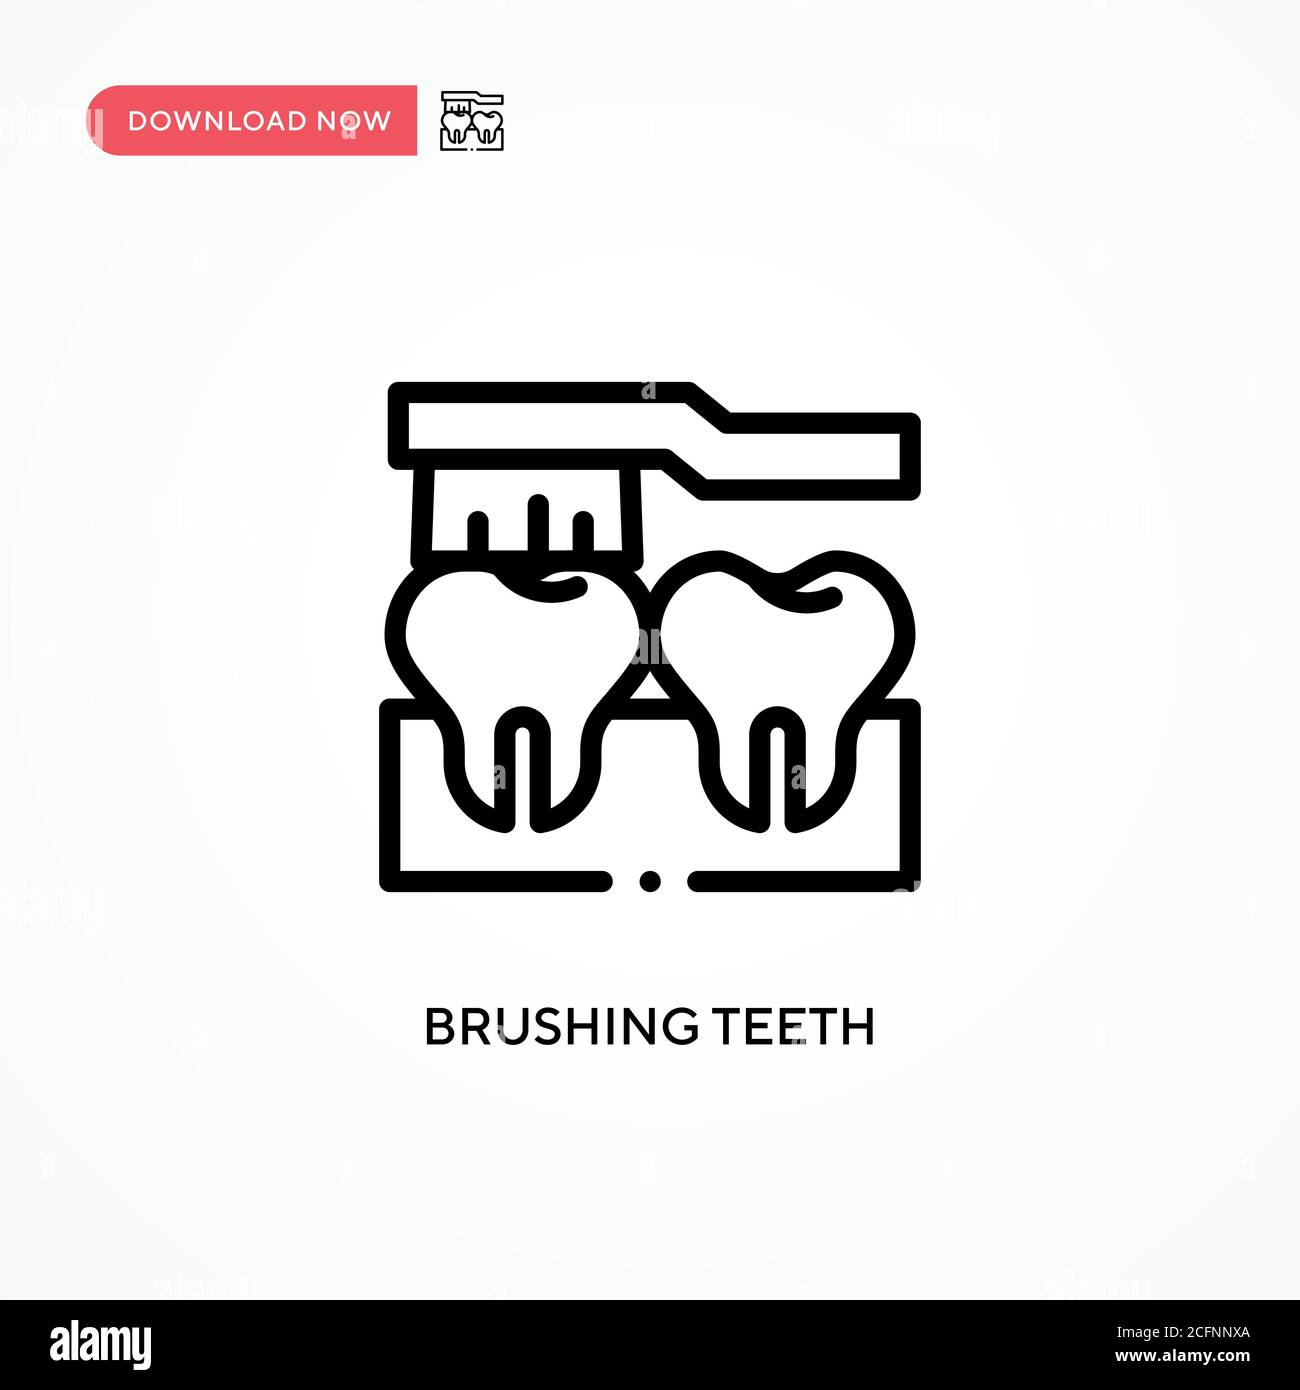 Brushing teeth vector icon. Modern, simple flat vector illustration for web site or mobile app Stock Vector